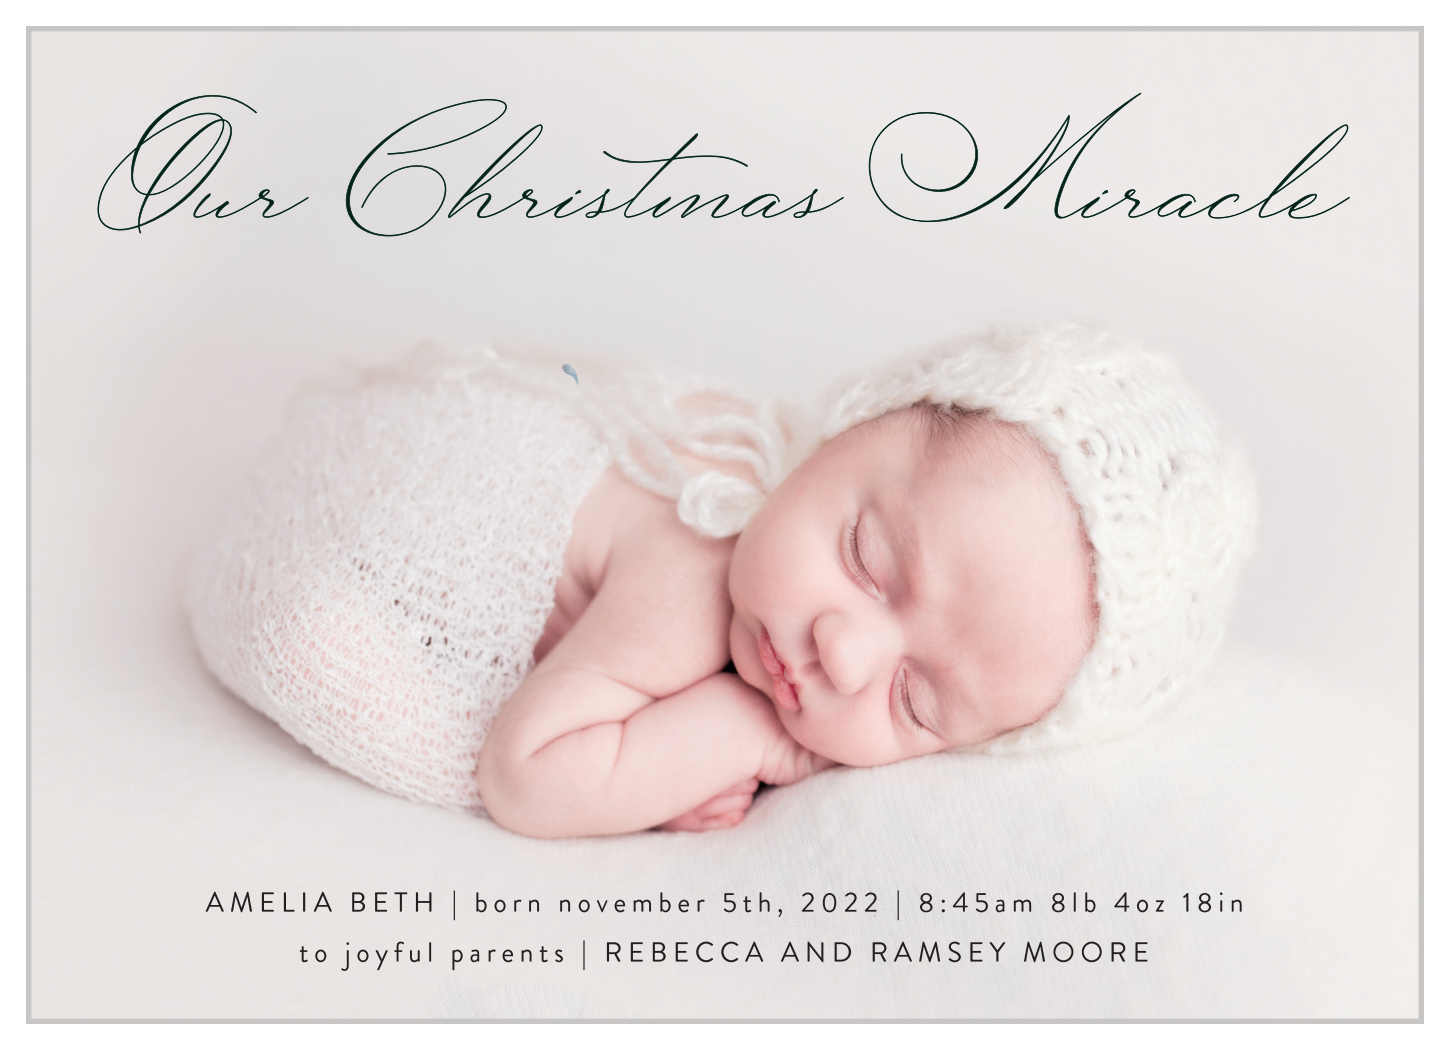 Our Miracle Christmas Cards